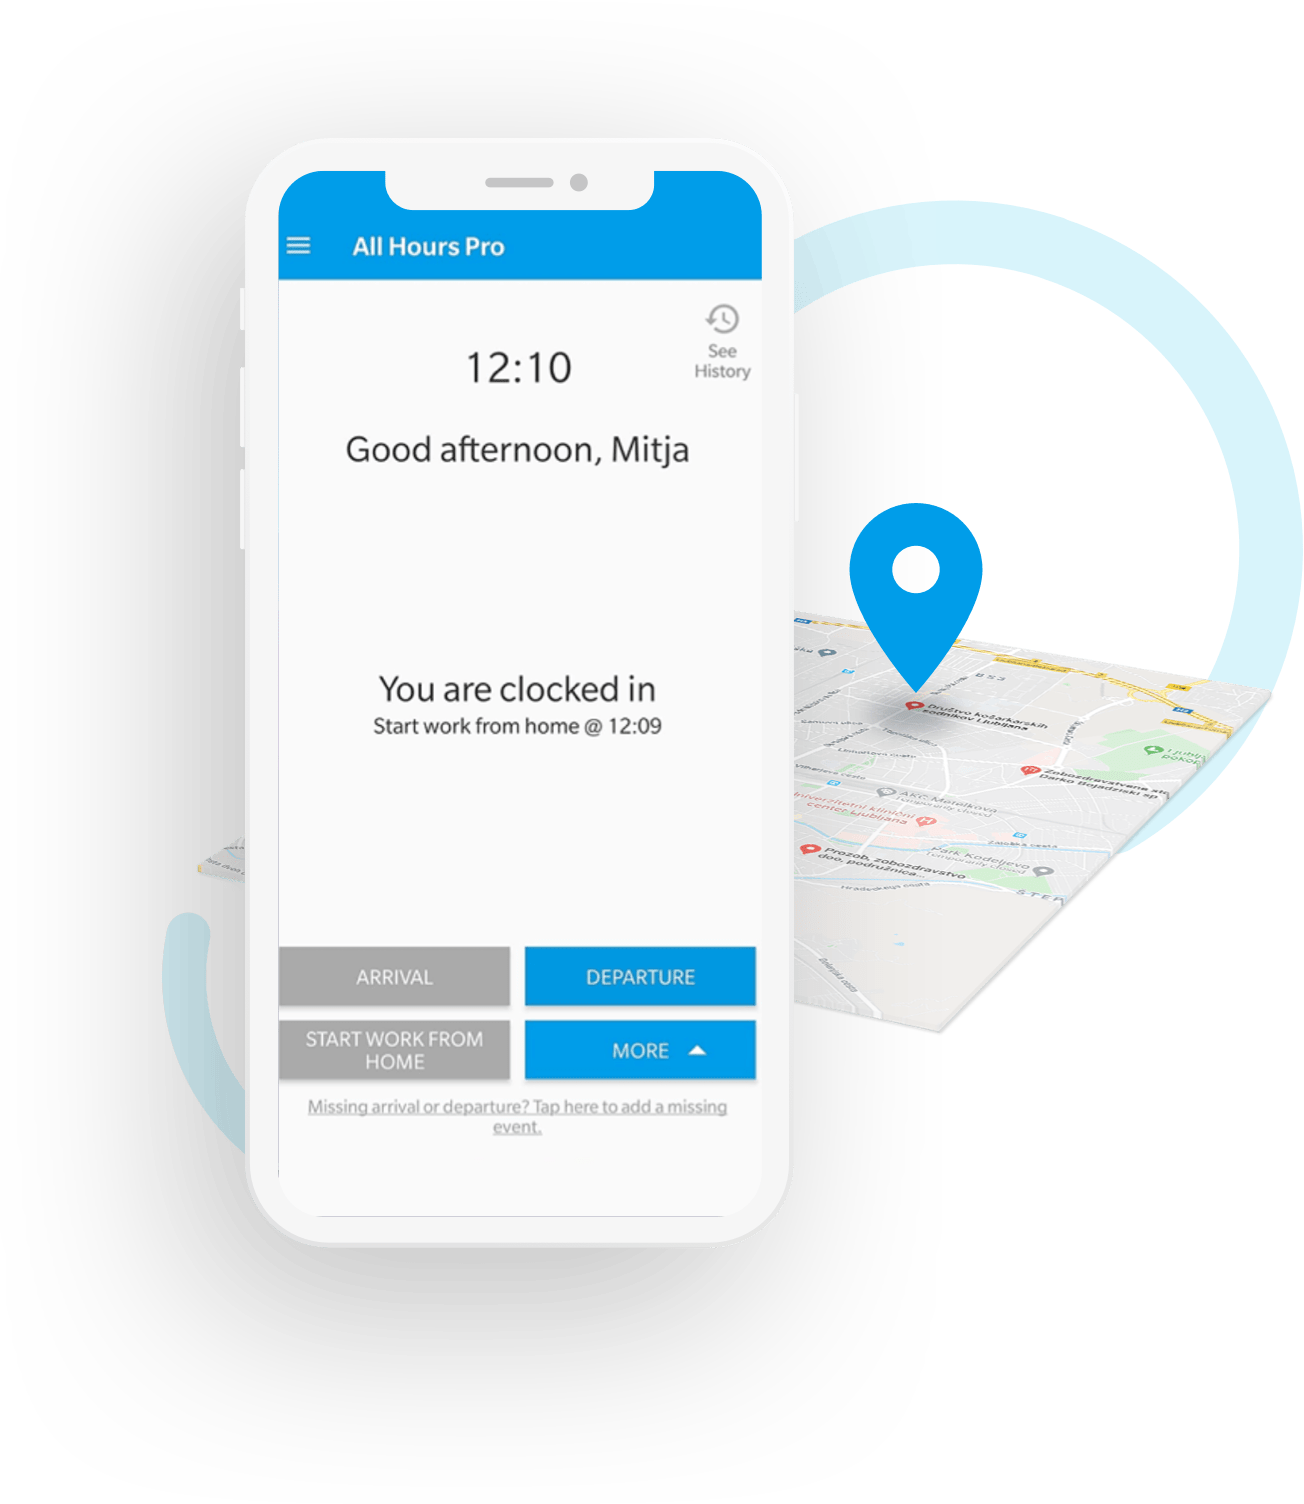 GPS coordinates for detailed location data